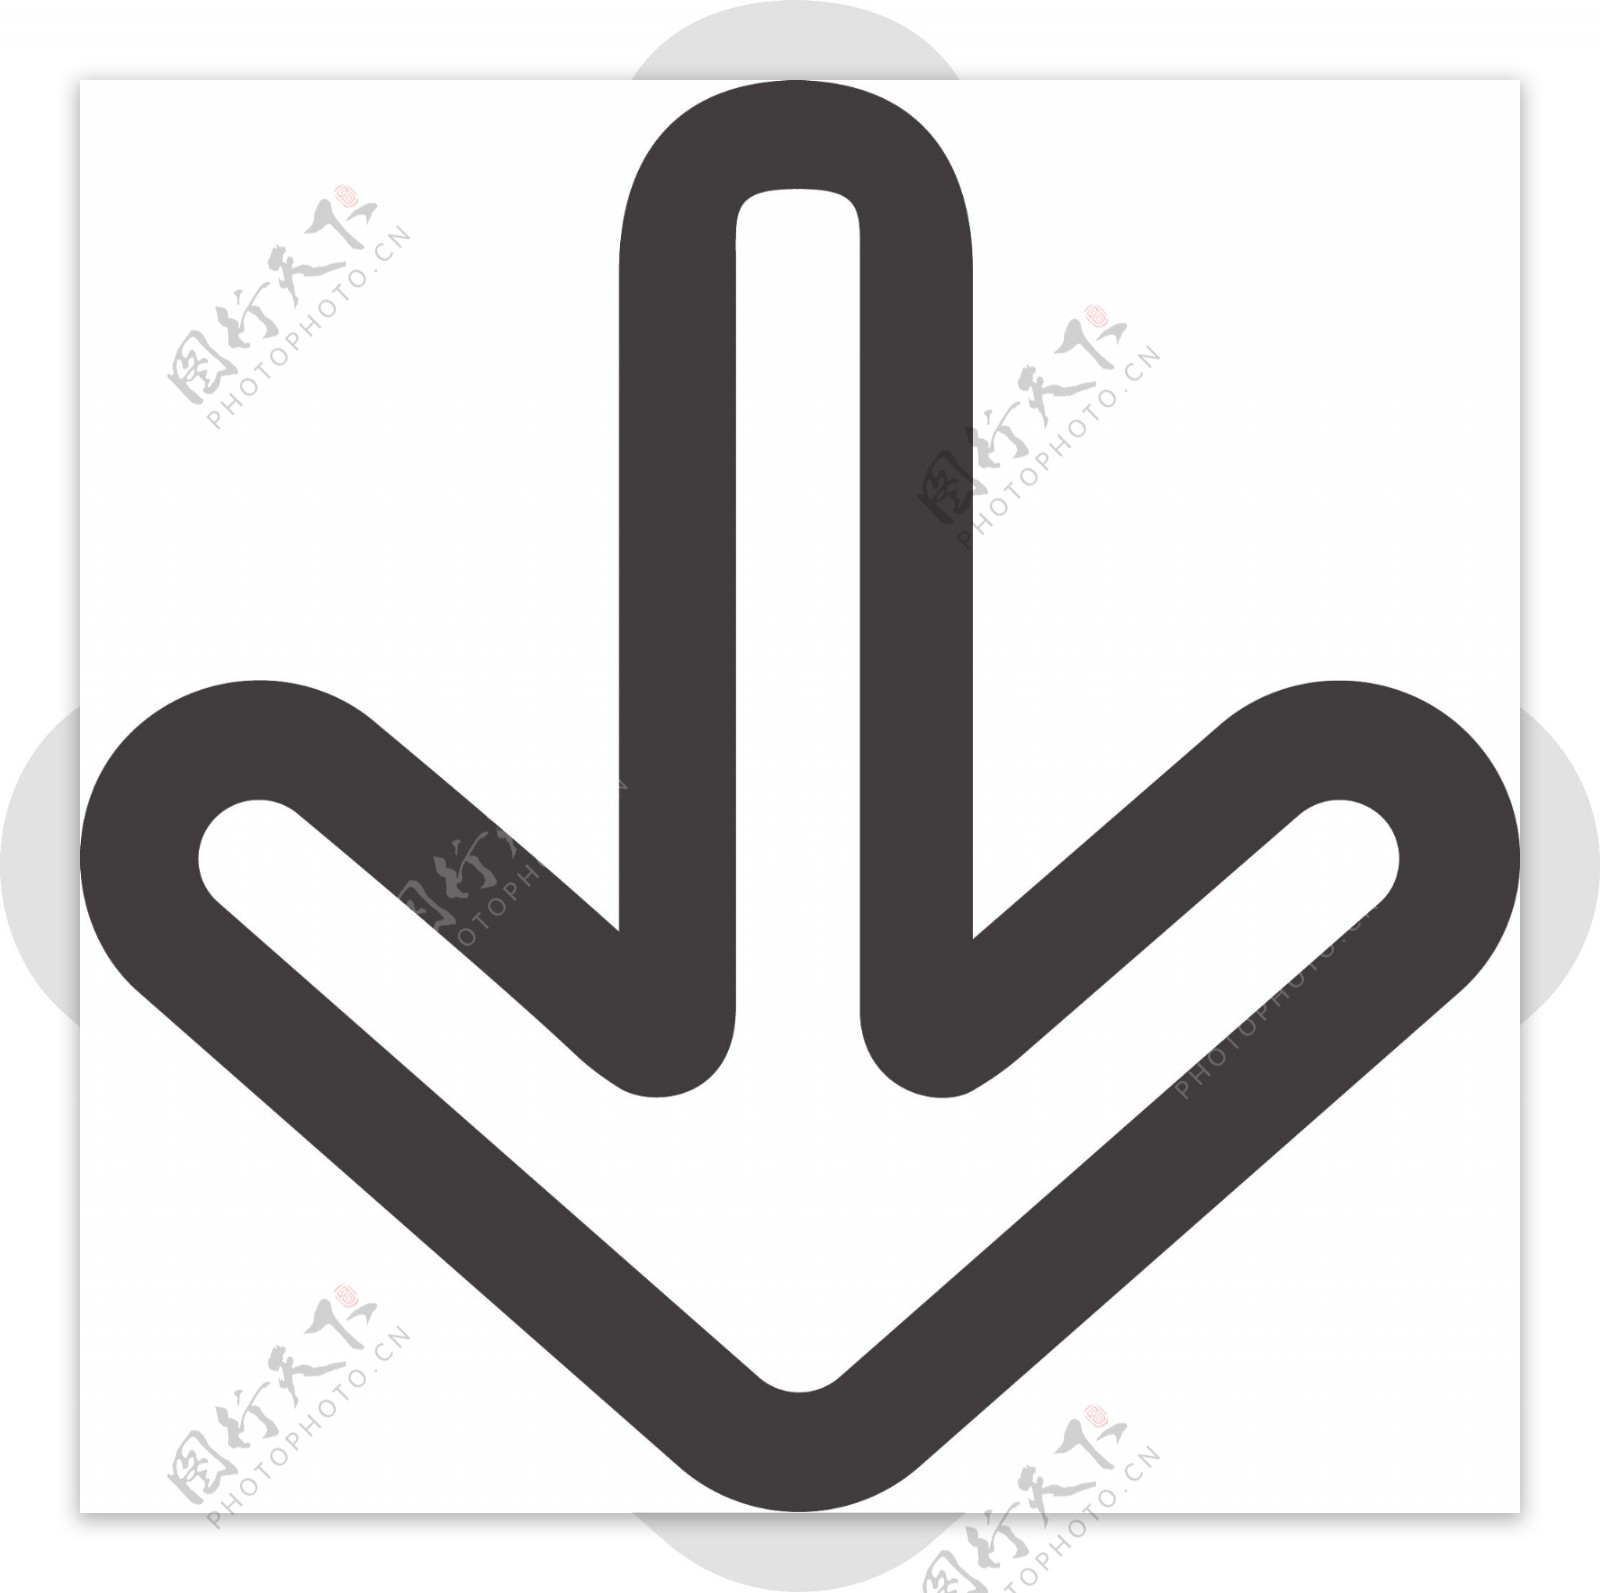 Down Arrow Png